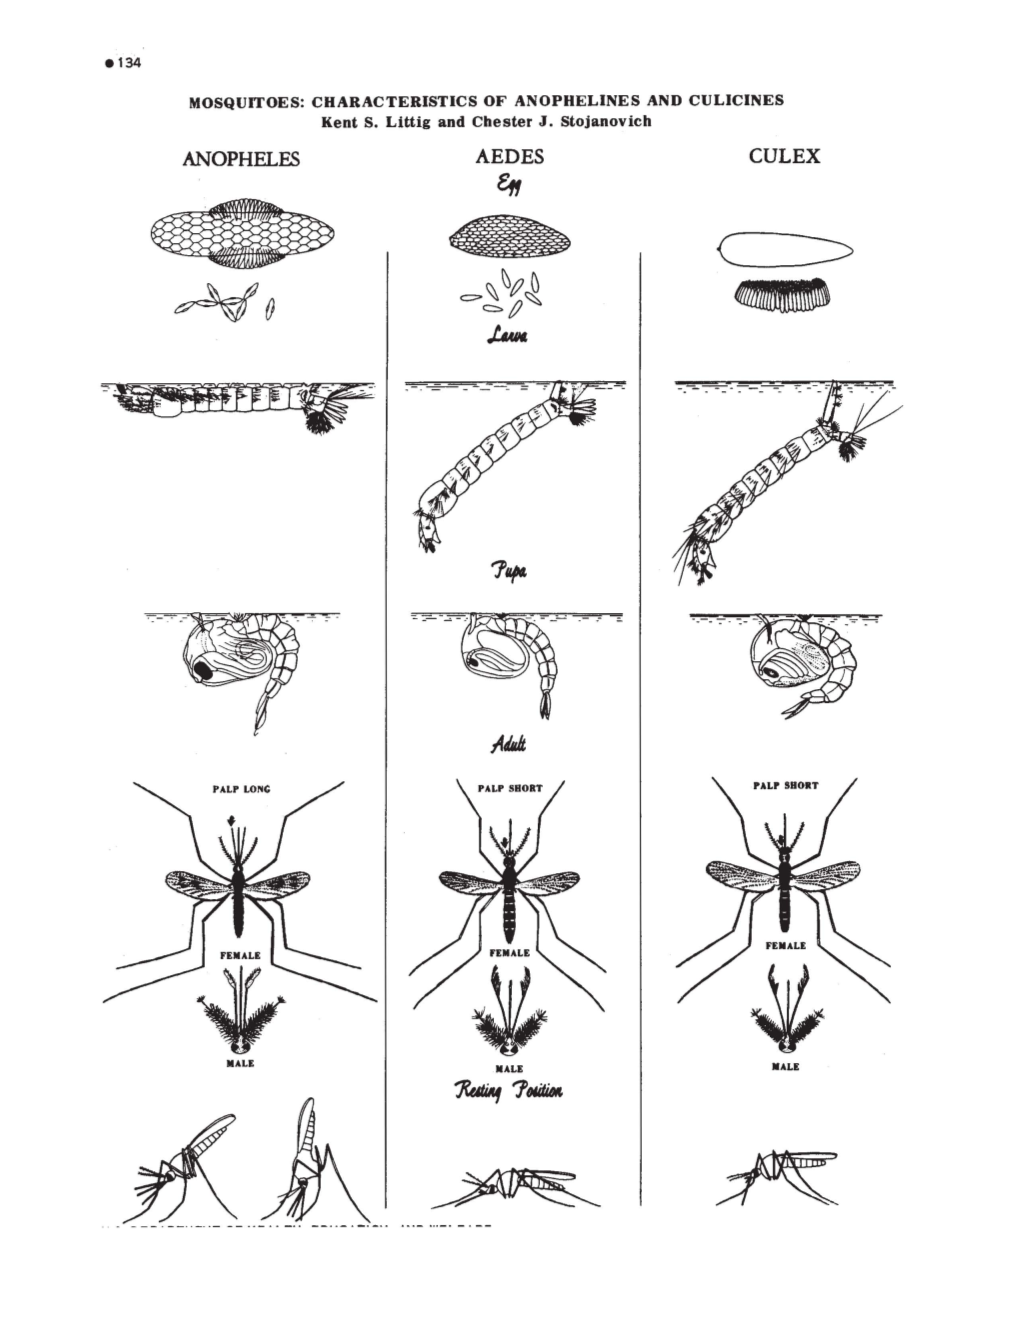 MOSQUITOES: CHARACTERISTICS of ANOPHELINES and CULICINES Kent S